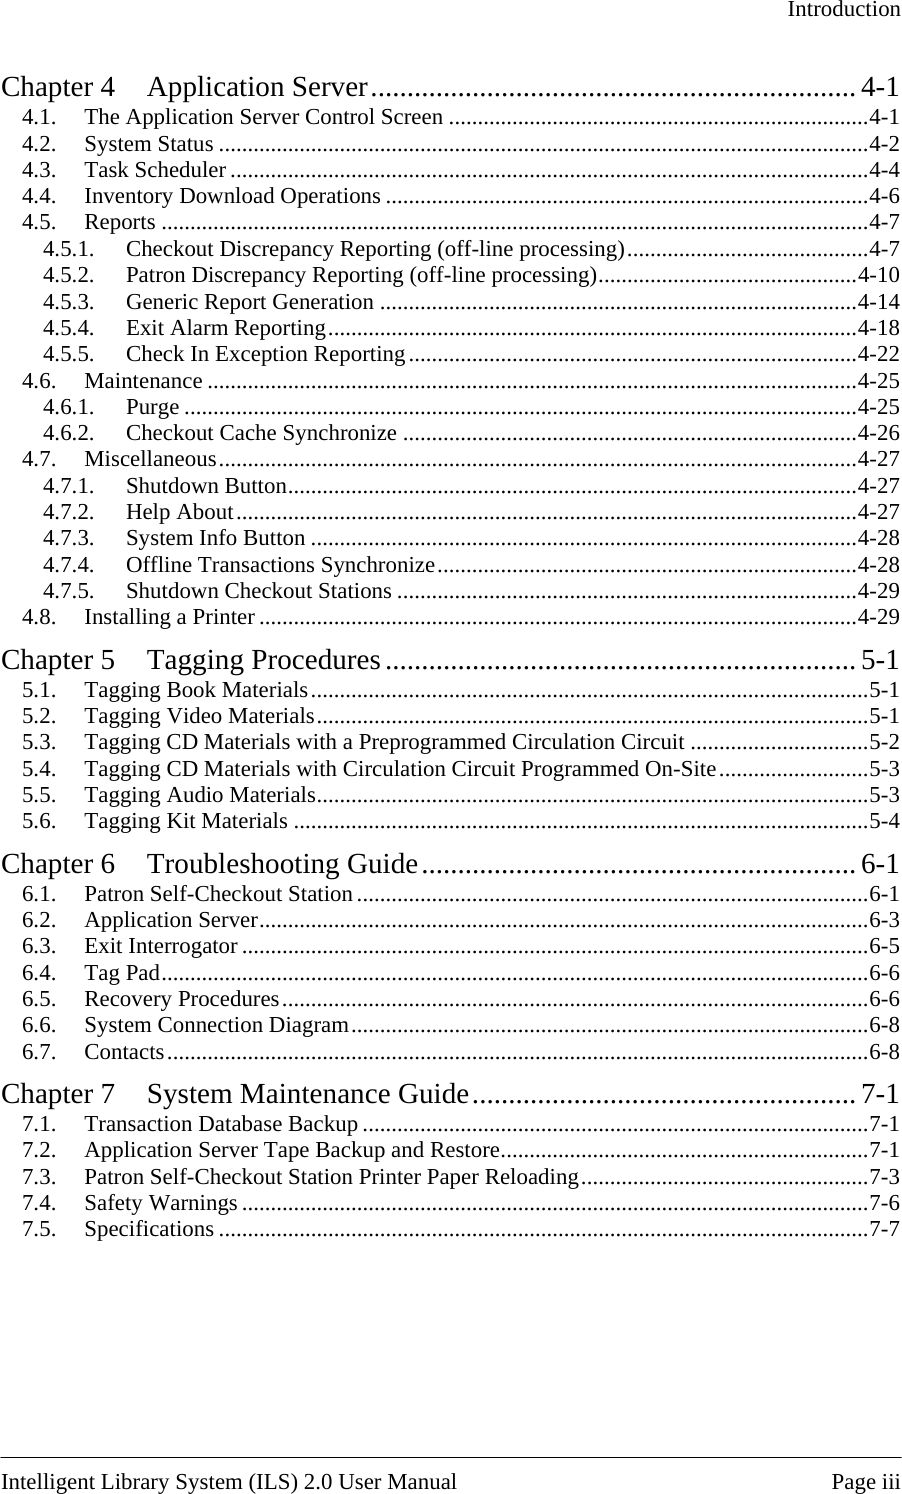   Introduction  Chapter 4 Application Server................................................................... 4-1 4.1. The Application Server Control Screen .........................................................................4-1 4.2. System Status .................................................................................................................4-2 4.3. Task Scheduler ...............................................................................................................4-4 4.4. Inventory Download Operations ....................................................................................4-6 4.5. Reports ...........................................................................................................................4-7 4.5.1. Checkout Discrepancy Reporting (off-line processing)..........................................4-7 4.5.2. Patron Discrepancy Reporting (off-line processing).............................................4-10 4.5.3. Generic Report Generation ...................................................................................4-14 4.5.4. Exit Alarm Reporting............................................................................................4-18 4.5.5. Check In Exception Reporting..............................................................................4-22 4.6. Maintenance .................................................................................................................4-25 4.6.1. Purge .....................................................................................................................4-25 4.6.2. Checkout Cache Synchronize ...............................................................................4-26 4.7. Miscellaneous...............................................................................................................4-27 4.7.1. Shutdown Button...................................................................................................4-27 4.7.2. Help About............................................................................................................4-27 4.7.3. System Info Button ...............................................................................................4-28 4.7.4. Offline Transactions Synchronize.........................................................................4-28 4.7.5. Shutdown Checkout Stations ................................................................................4-29 4.8. Installing a Printer ........................................................................................................4-29 Chapter 5 Tagging Procedures................................................................. 5-1 5.1. Tagging Book Materials.................................................................................................5-1 5.2. Tagging Video Materials................................................................................................5-1 5.3. Tagging CD Materials with a Preprogrammed Circulation Circuit ...............................5-2 5.4. Tagging CD Materials with Circulation Circuit Programmed On-Site..........................5-3 5.5. Tagging Audio Materials................................................................................................5-3 5.6. Tagging Kit Materials ....................................................................................................5-4 Chapter 6 Troubleshooting Guide............................................................ 6-1 6.1. Patron Self-Checkout Station .........................................................................................6-1 6.2. Application Server..........................................................................................................6-3 6.3. Exit Interrogator .............................................................................................................6-5 6.4. Tag Pad...........................................................................................................................6-6 6.5. Recovery Procedures......................................................................................................6-6 6.6. System Connection Diagram..........................................................................................6-8 6.7. Contacts..........................................................................................................................6-8 Chapter 7 System Maintenance Guide..................................................... 7-1 7.1. Transaction Database Backup ........................................................................................7-1 7.2. Application Server Tape Backup and Restore................................................................7-1 7.3. Patron Self-Checkout Station Printer Paper Reloading..................................................7-3 7.4. Safety Warnings .............................................................................................................7-6 7.5. Specifications .................................................................................................................7-7   Intelligent Library System (ILS) 2.0 User Manual  Page iii 